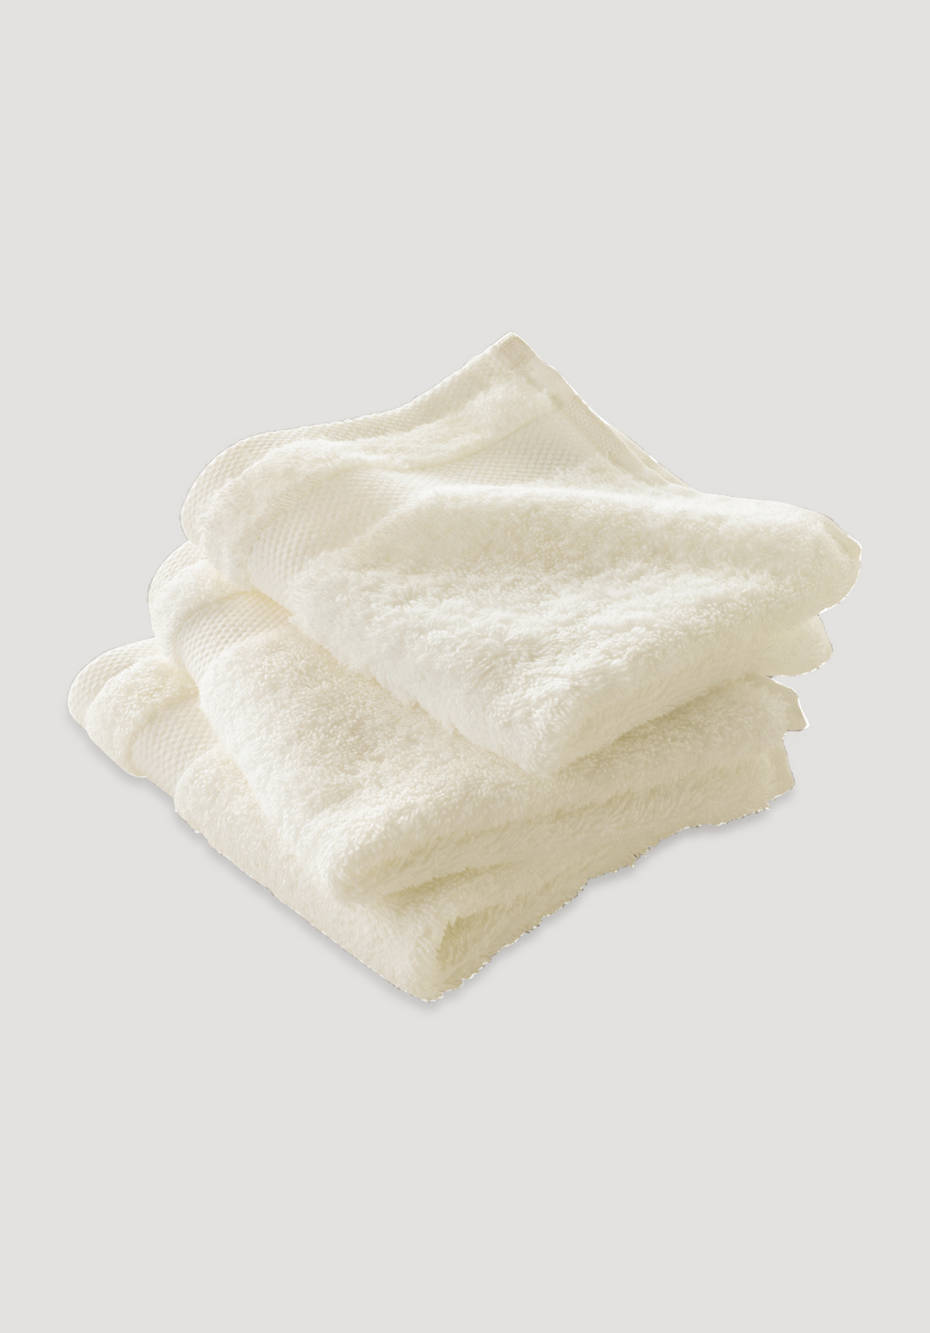 Washcloths in a set of 3 made from pure organic terrycloth